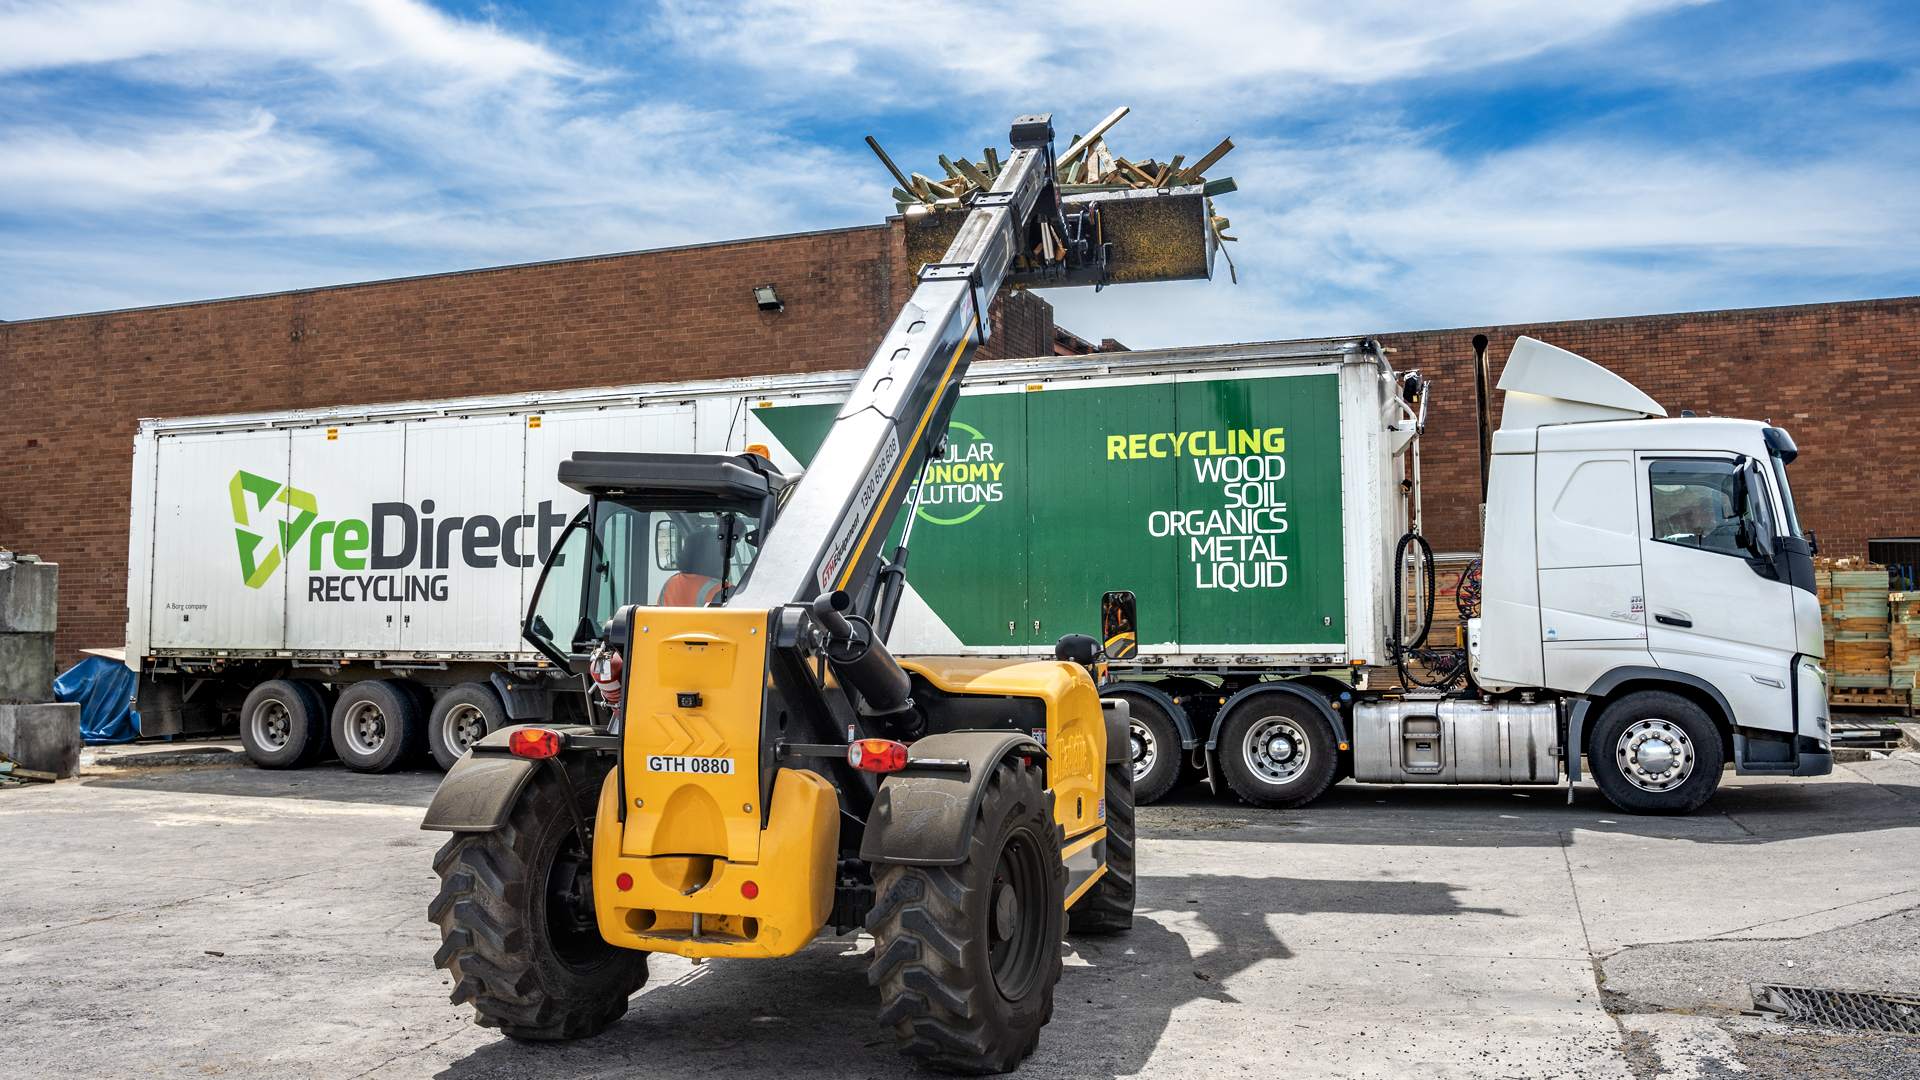 Belmont Timber Diverts Up To 40 Tons Of Timber Waste From Landfill Per Month